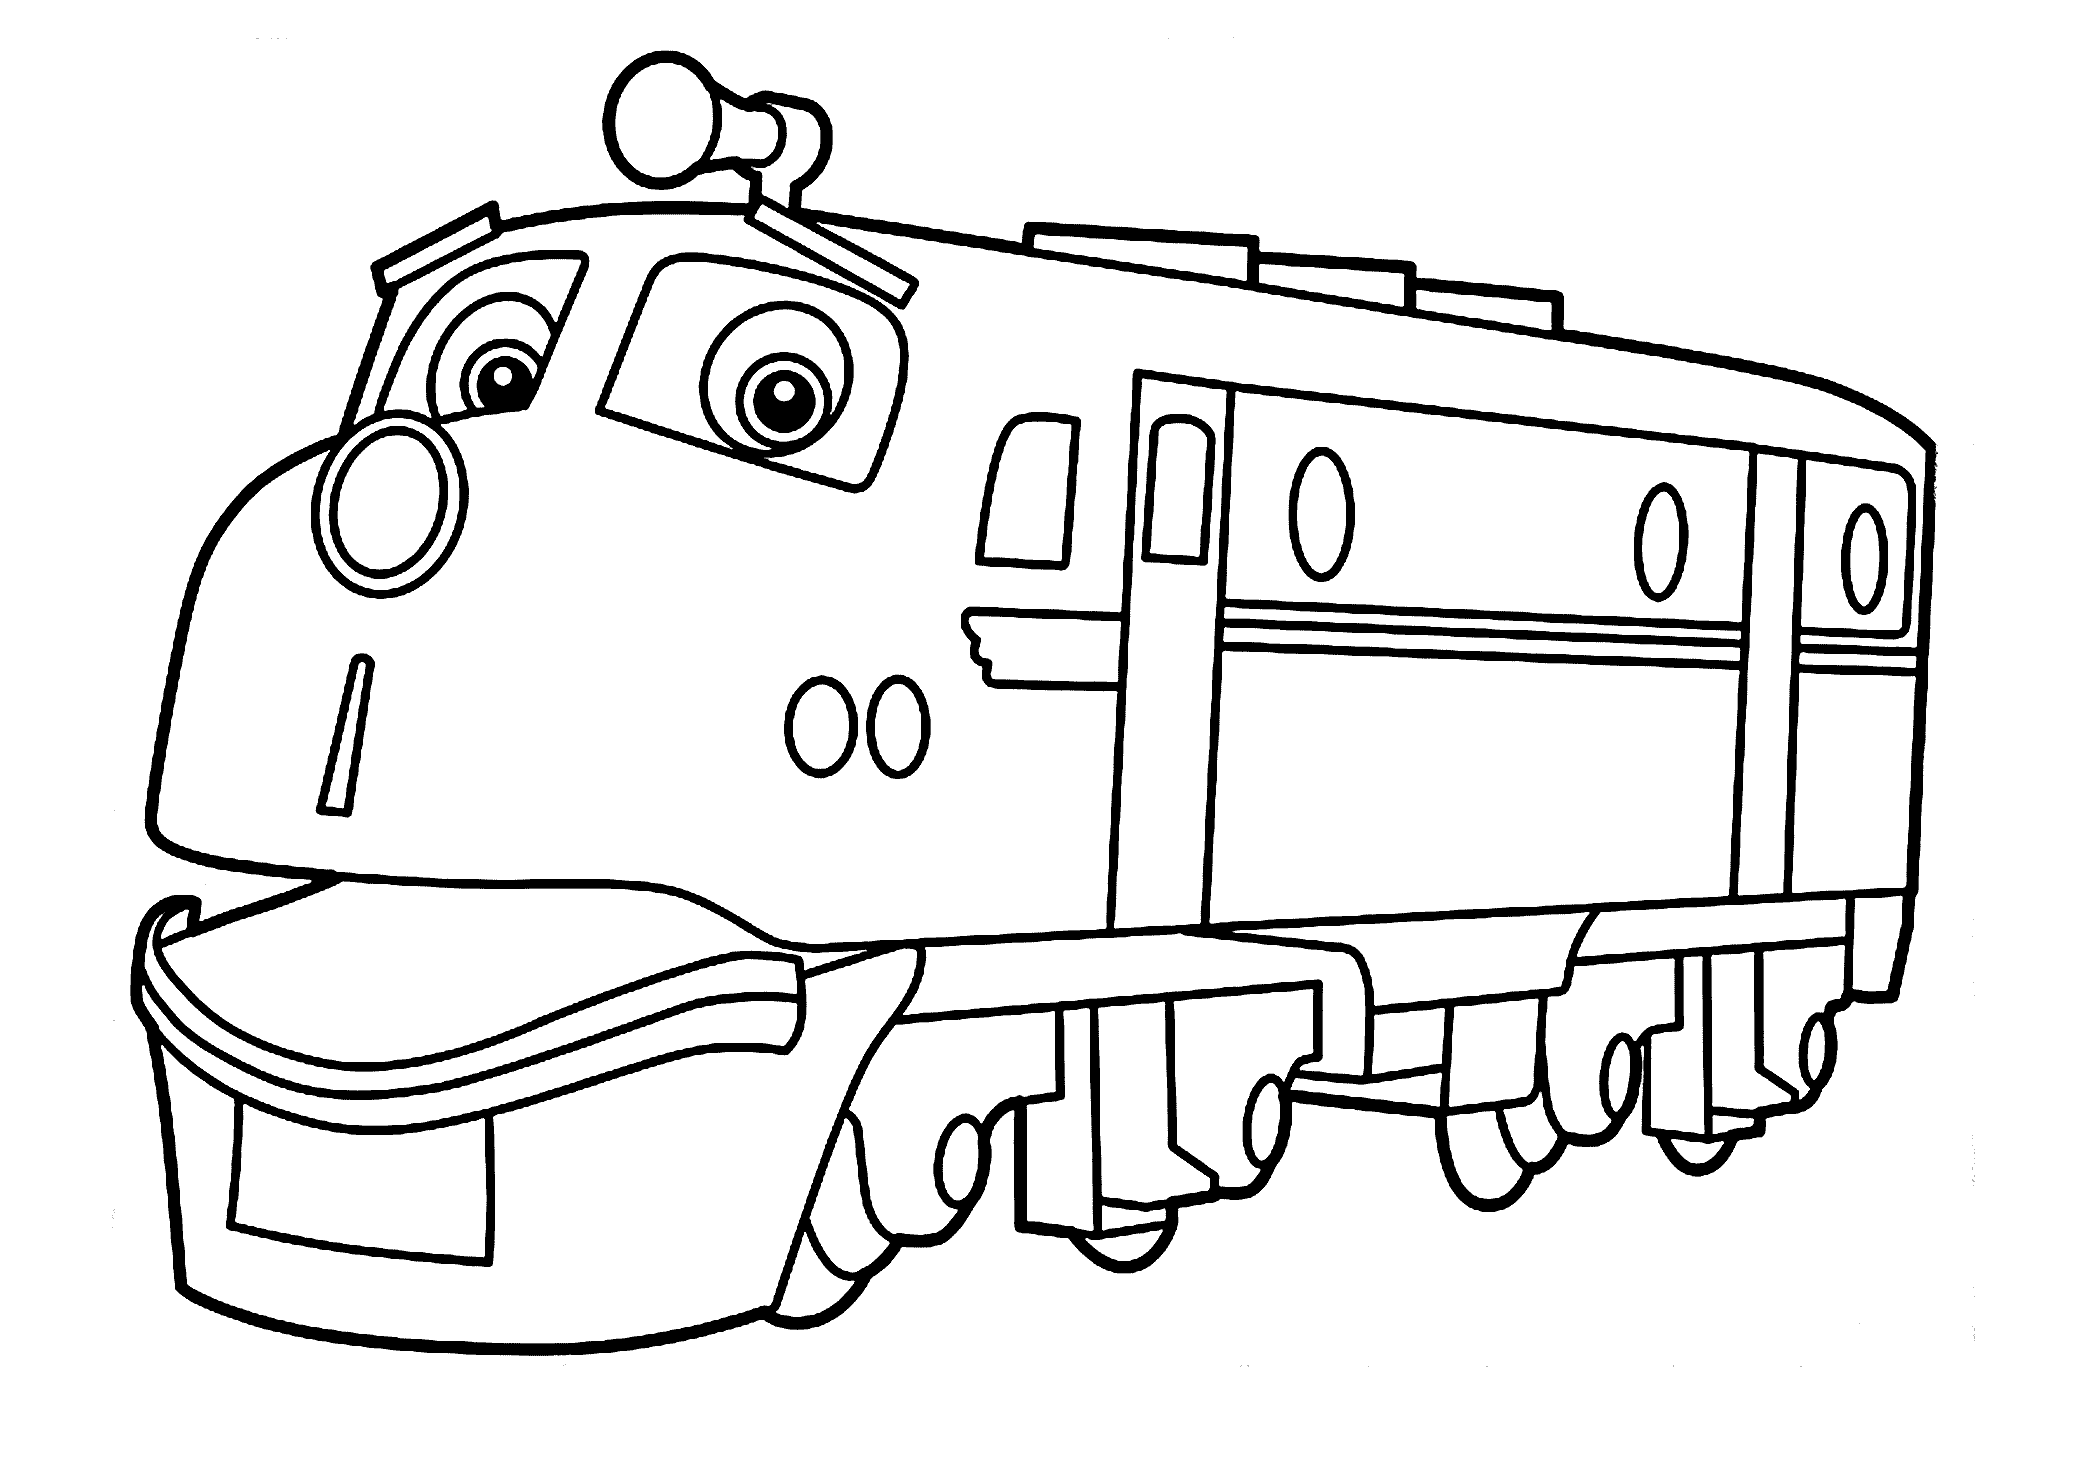 Chuggington coloring pages to download and print for free